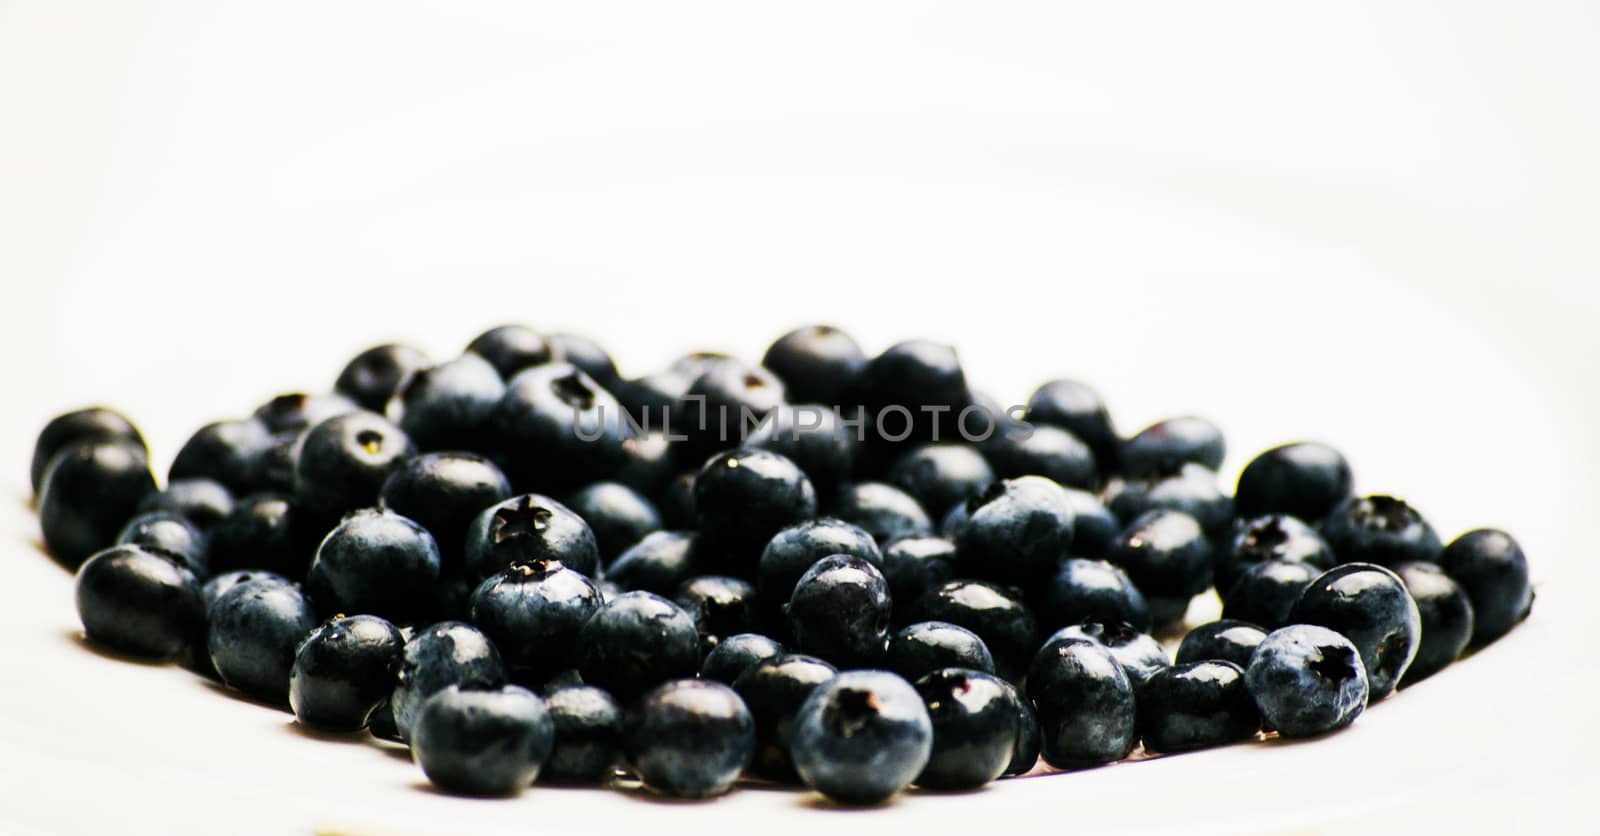 A moltitude of blueberries by federica_favara